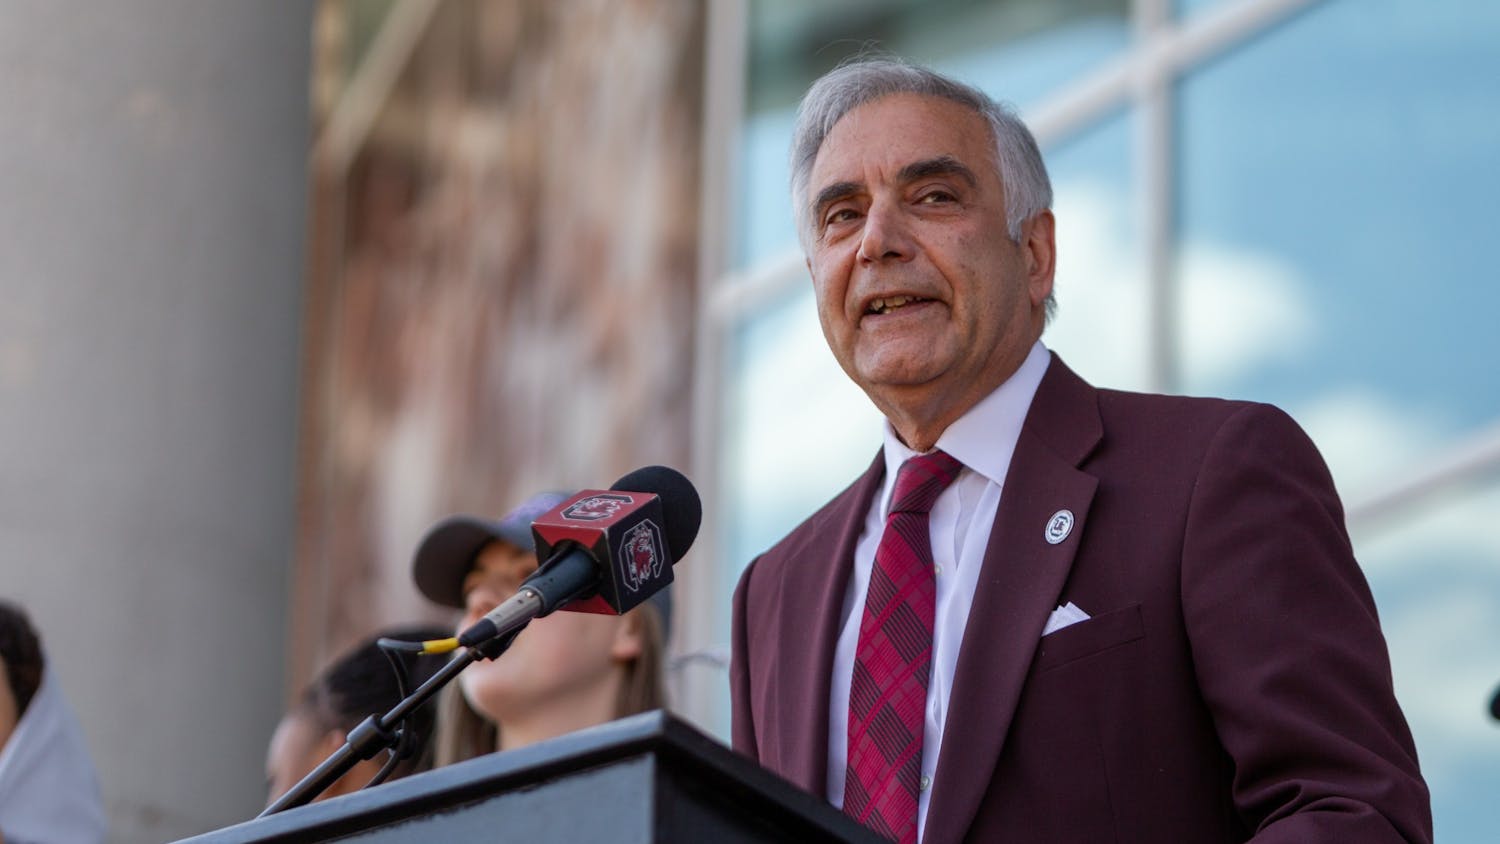 University of South Carolina interim university President Harris Pastides addresses the crowd at Colonial Life Arena on April 4, 2022. Pastides recognized the accomplishments of head coach Dawn Staley and her team.